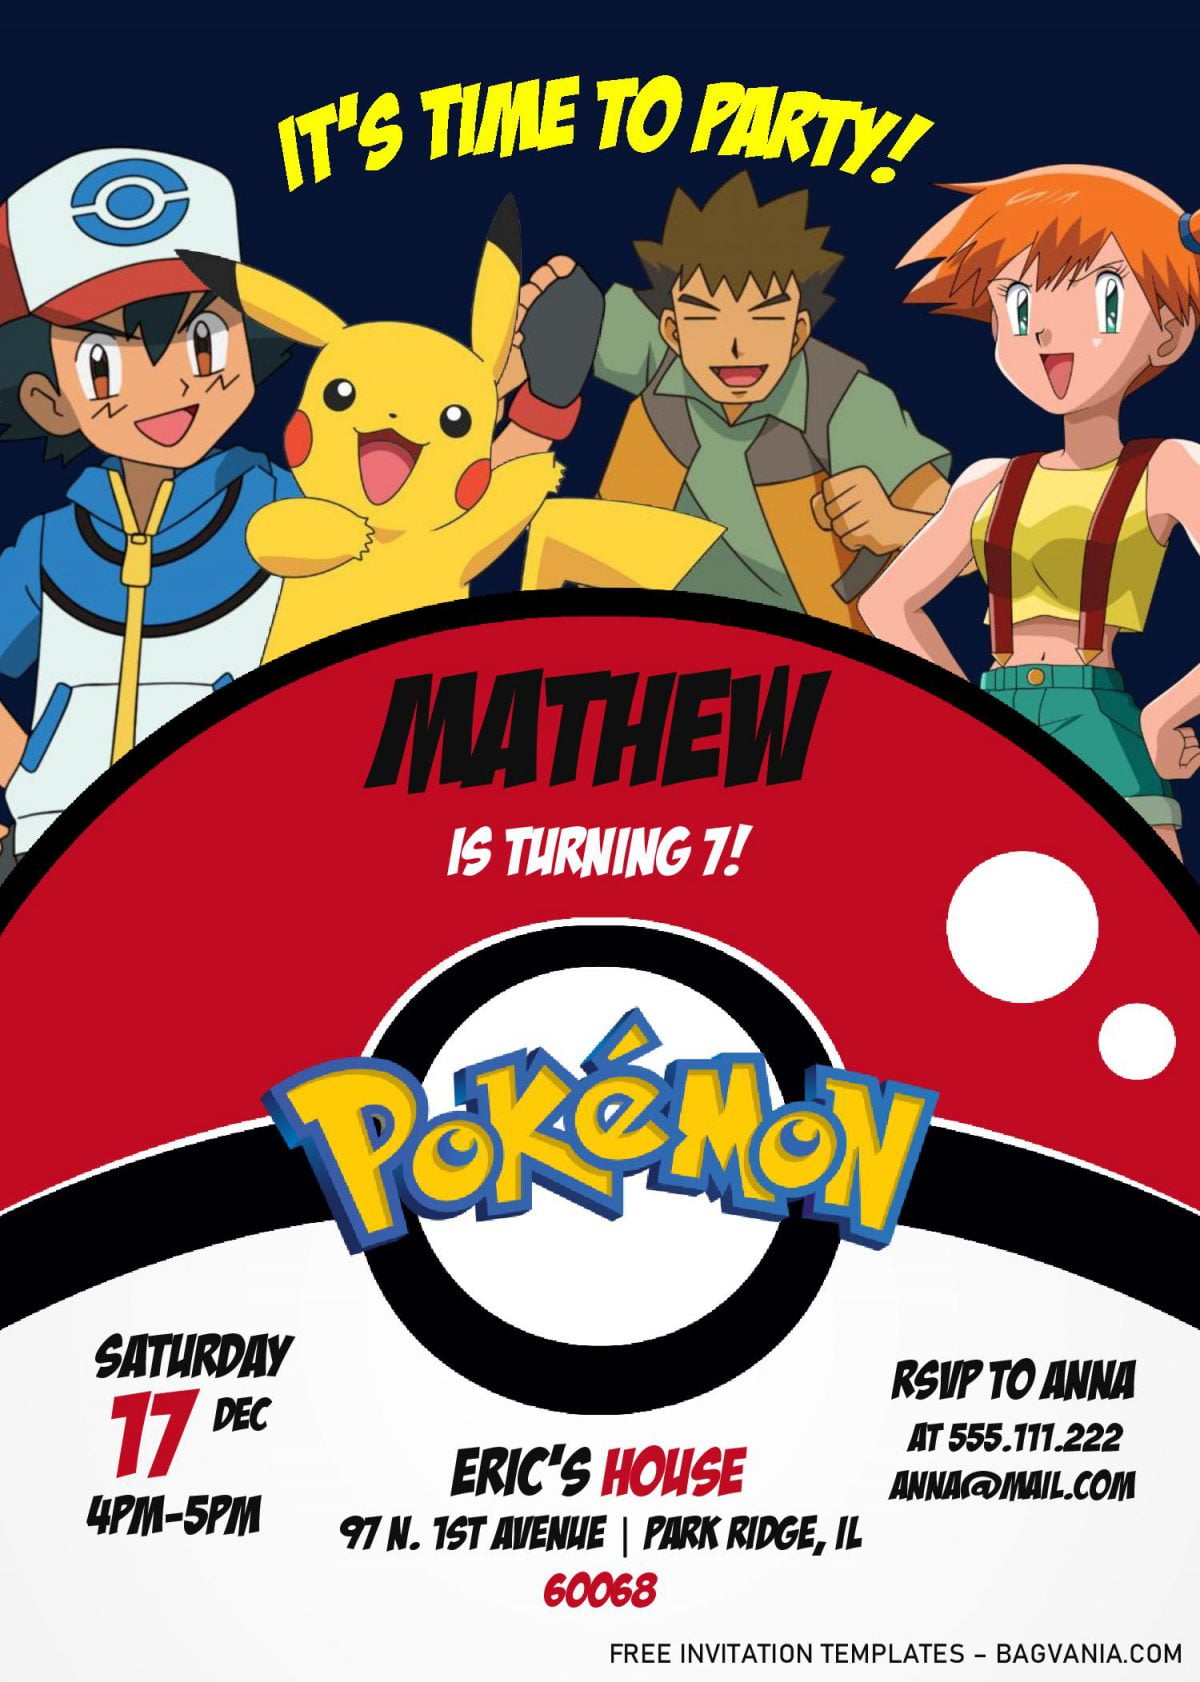 Pokemon Invitation Templates - Editable With MS Word and has ash and pikachu